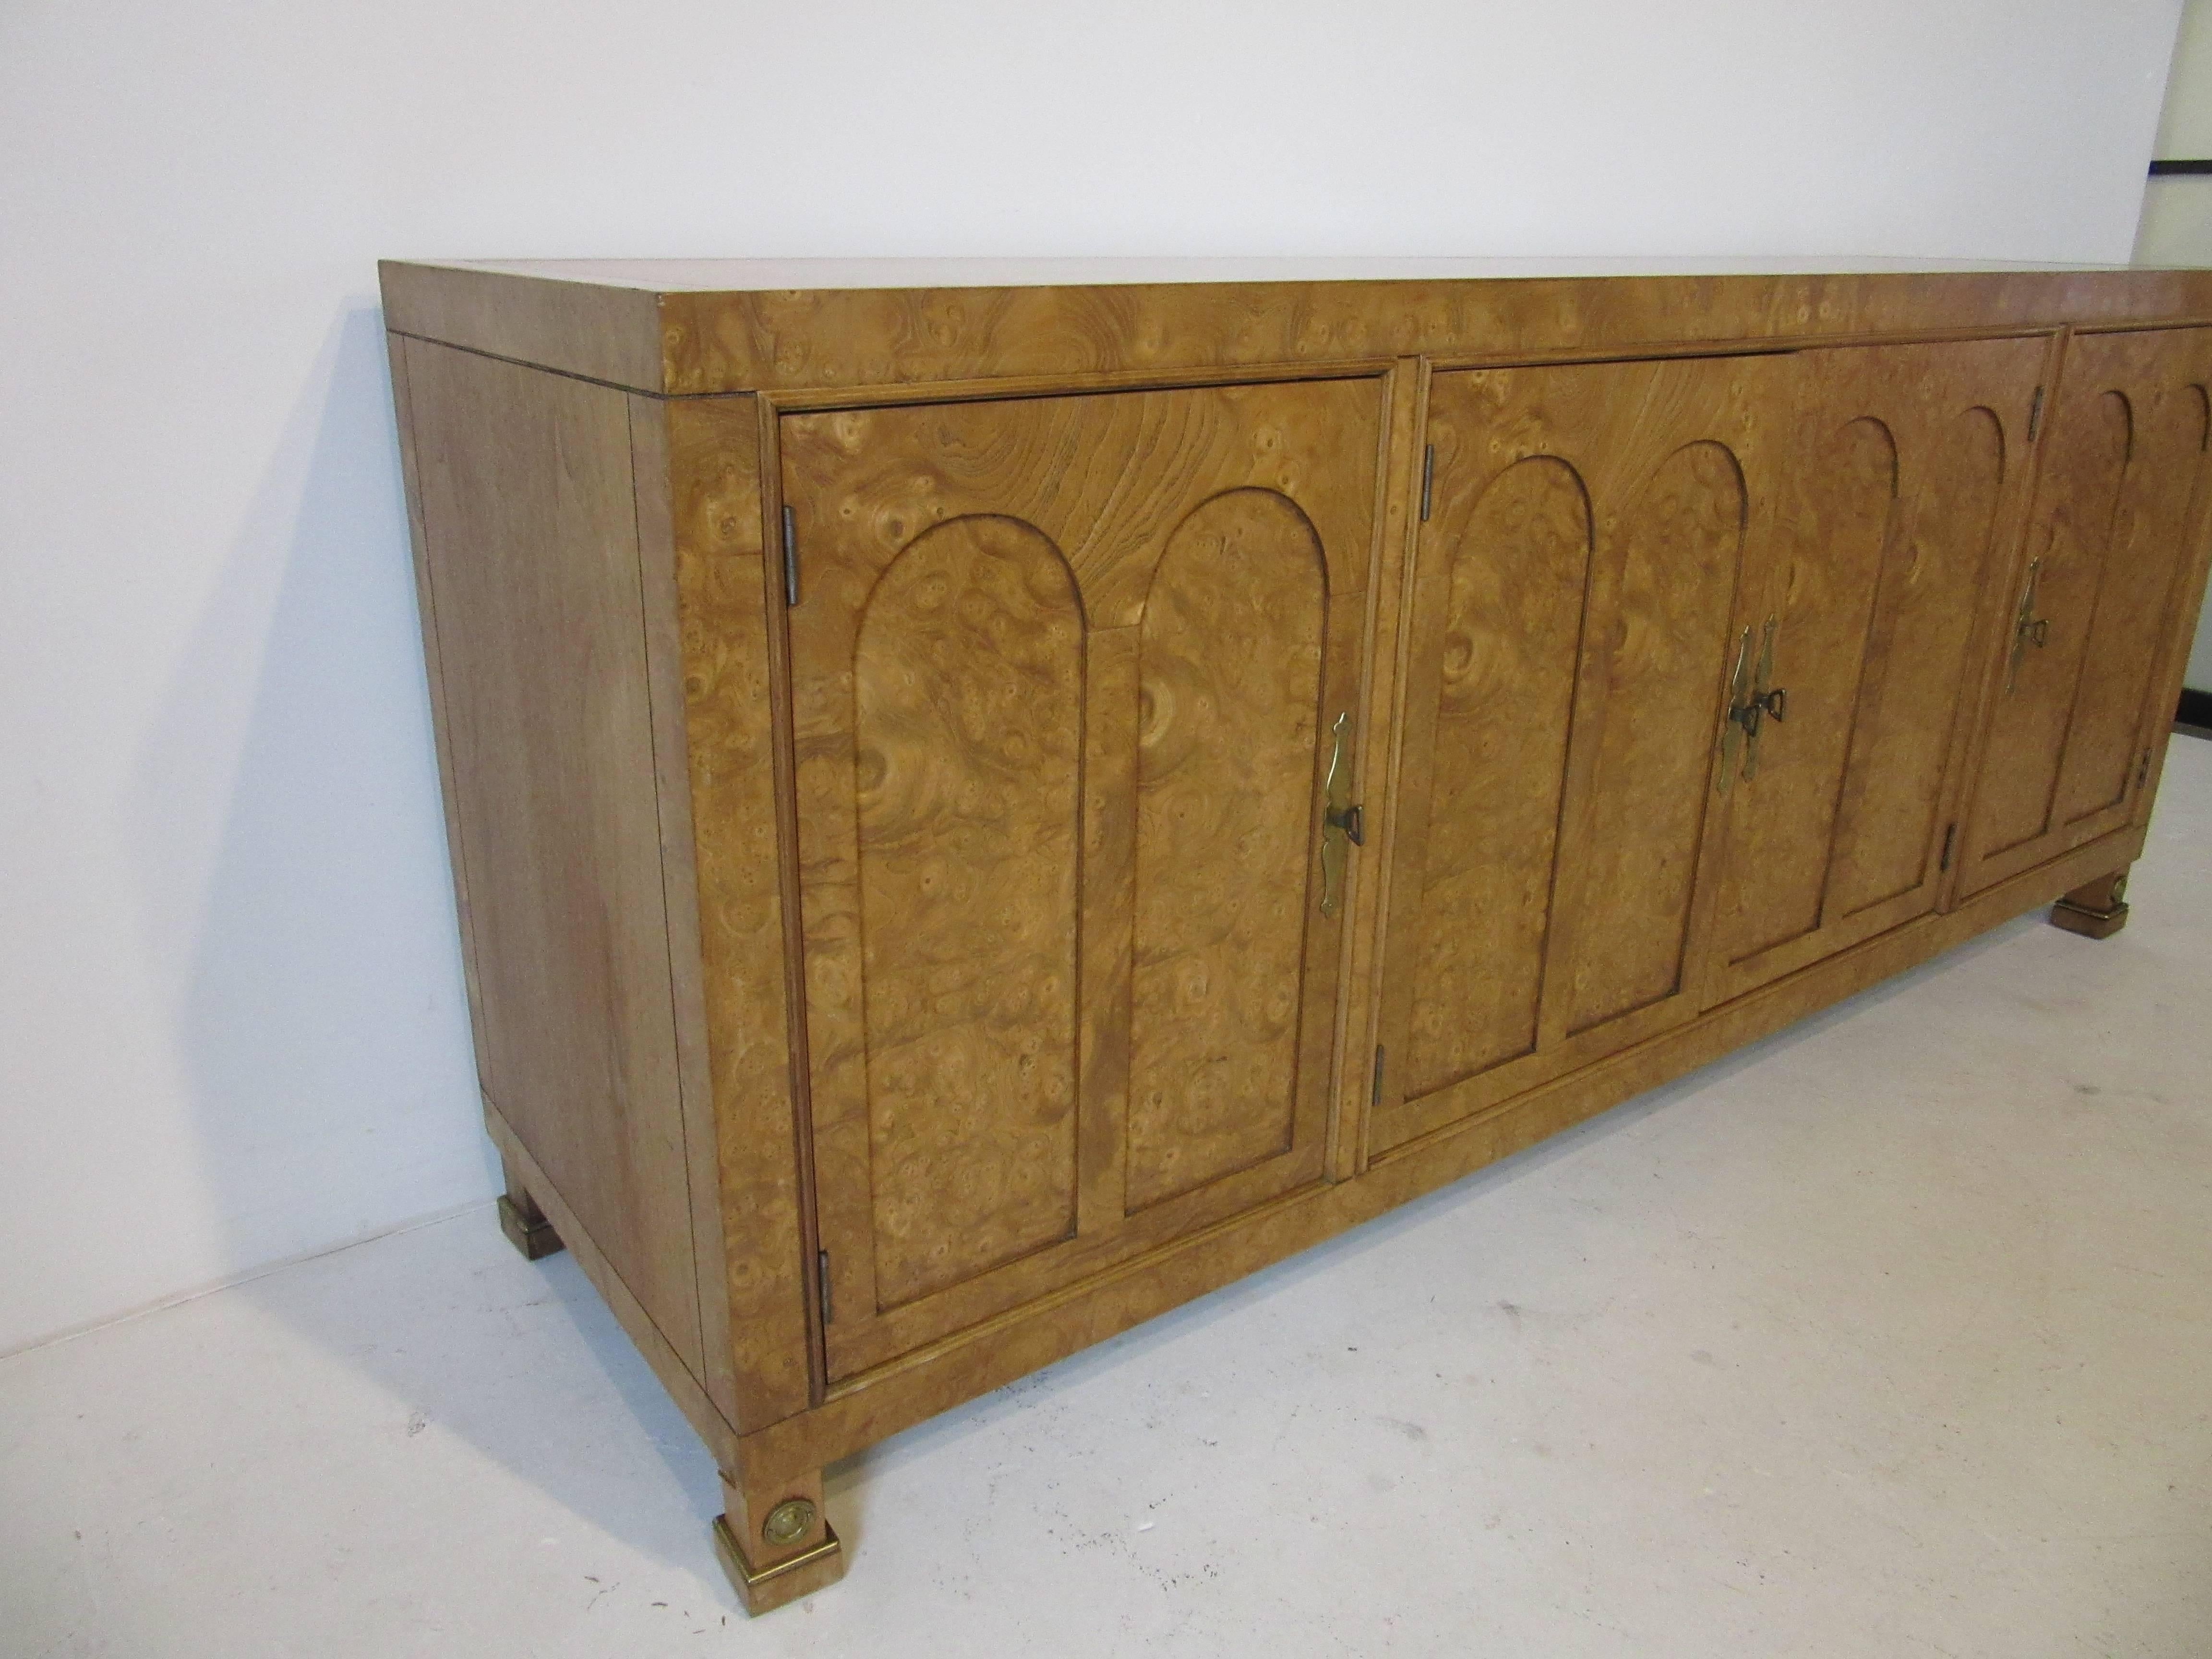 A four door burl wood credenza or sever with brass pulls and details, bookmatched front, columned legs, three drawers and two storage areas with an adjustable shelve to each end. Manufactured by the Mastercraft Furniture Company.